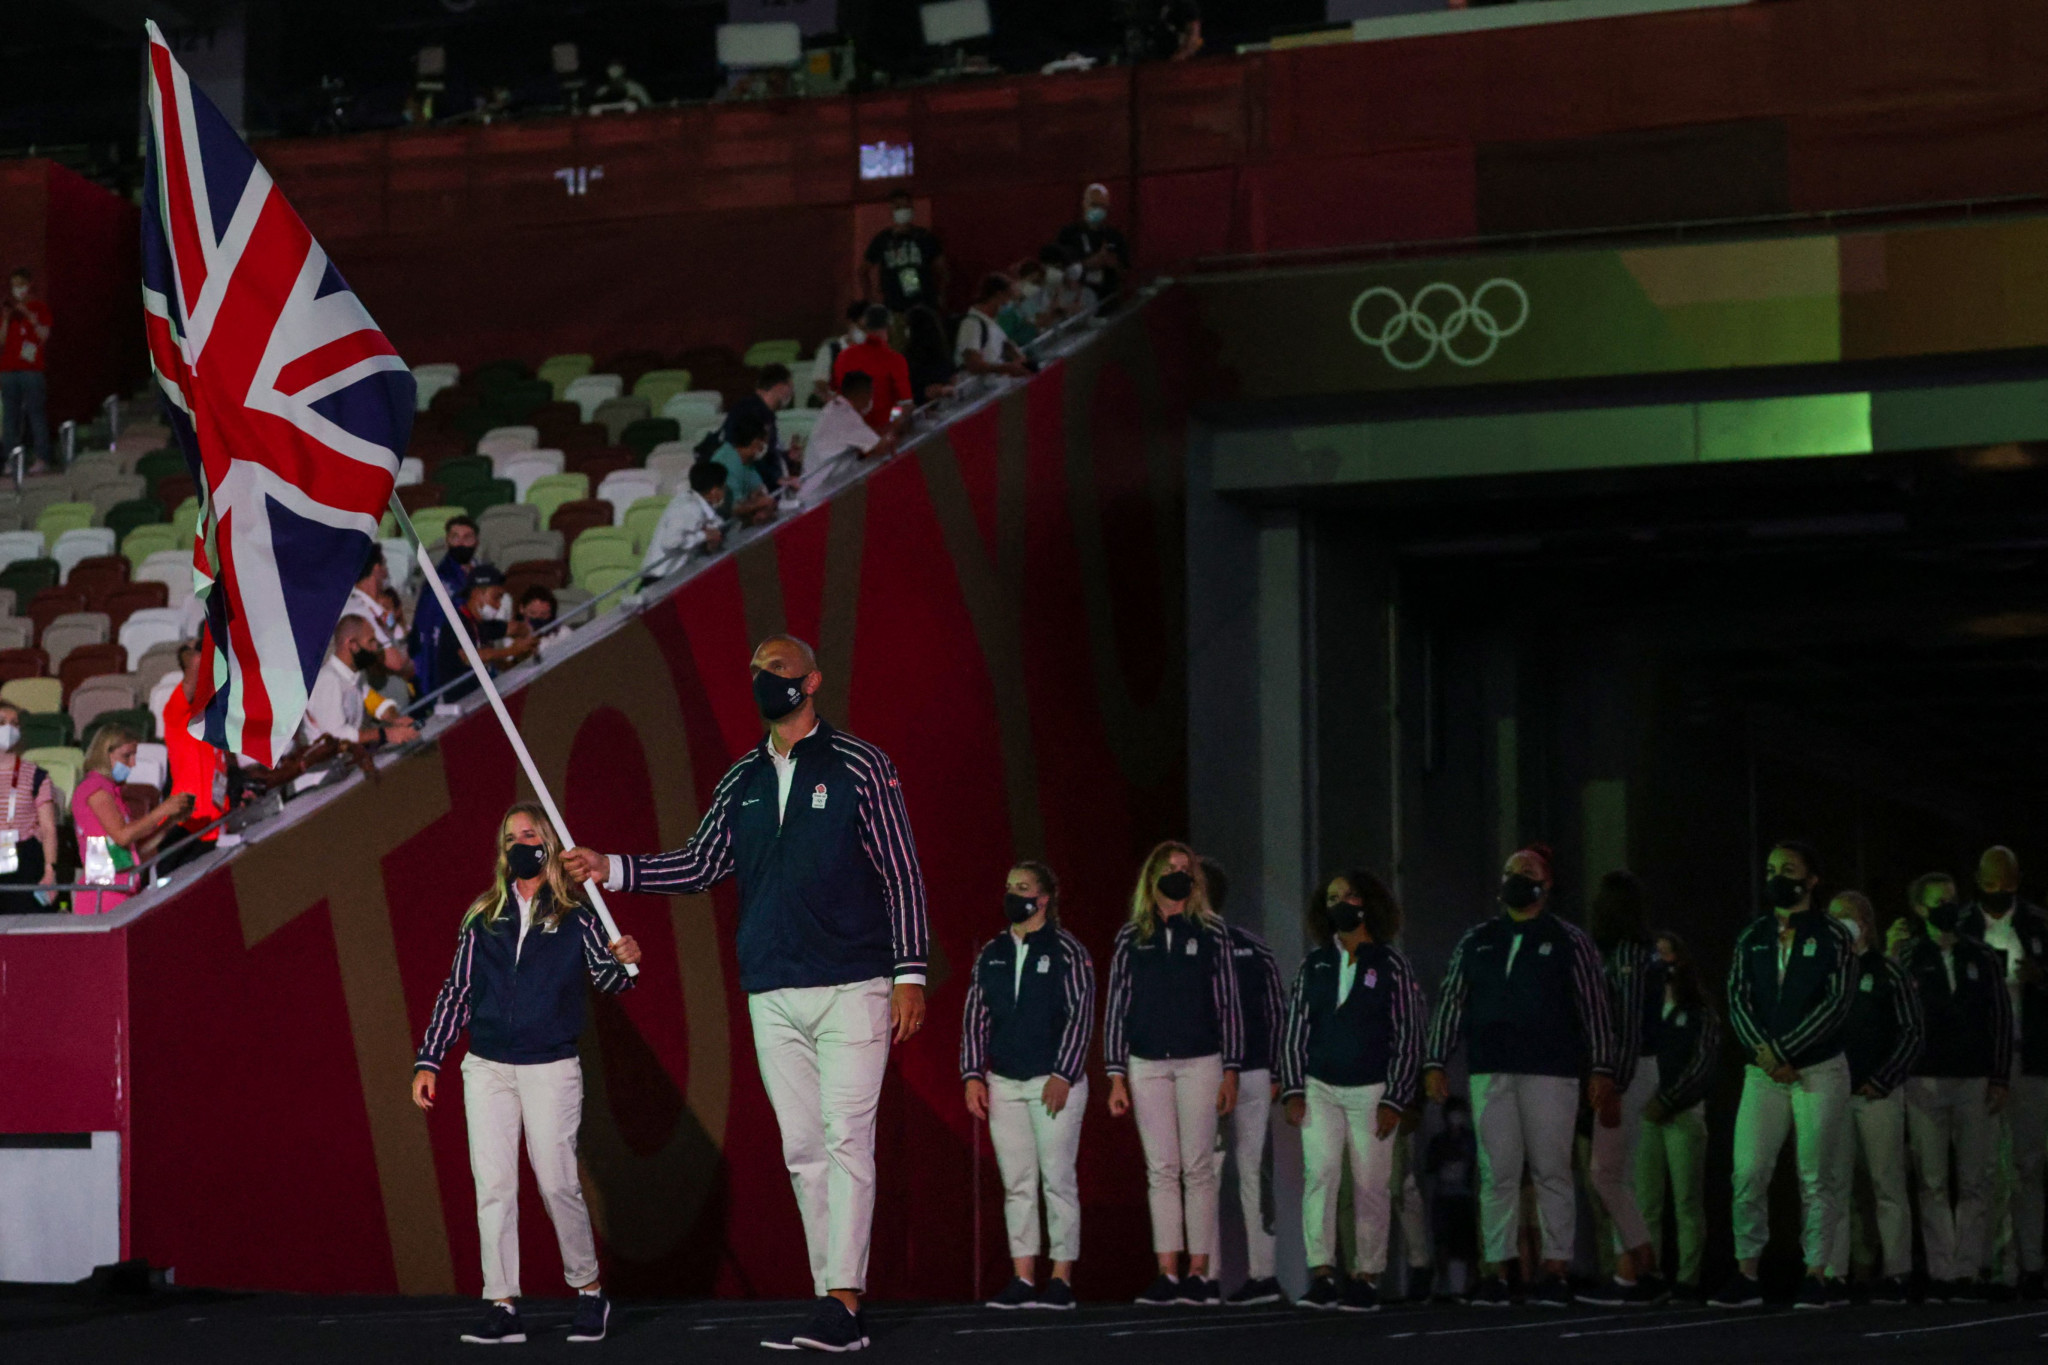 Britain placed fourth on the medals table at Tokyo 2020 ©Getty Images